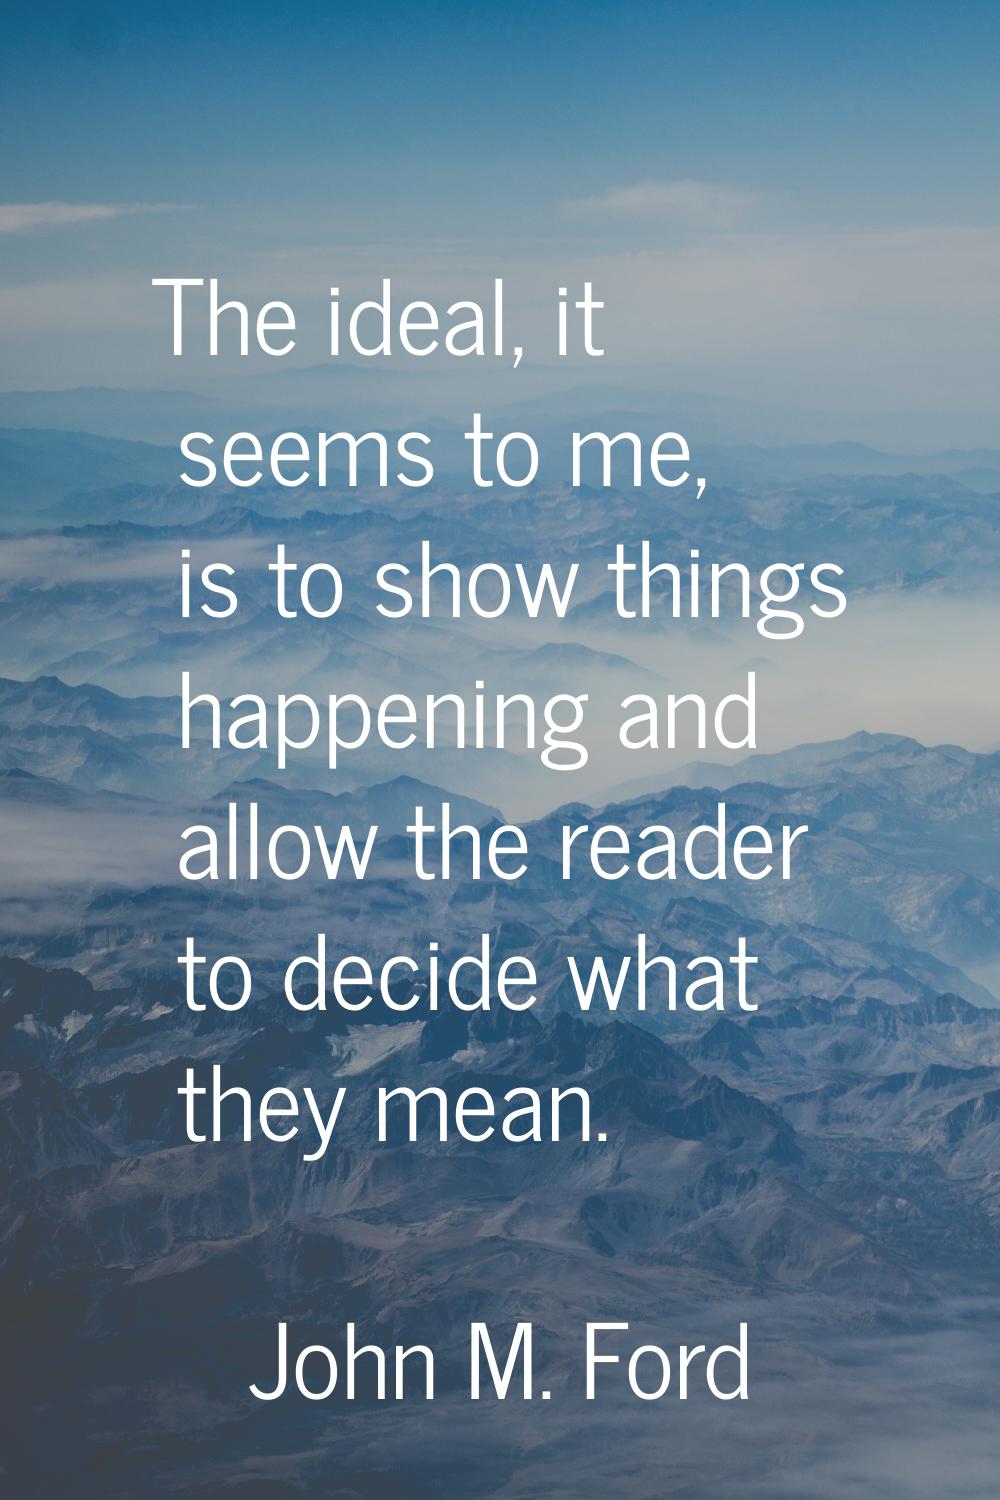 The ideal, it seems to me, is to show things happening and allow the reader to decide what they mea